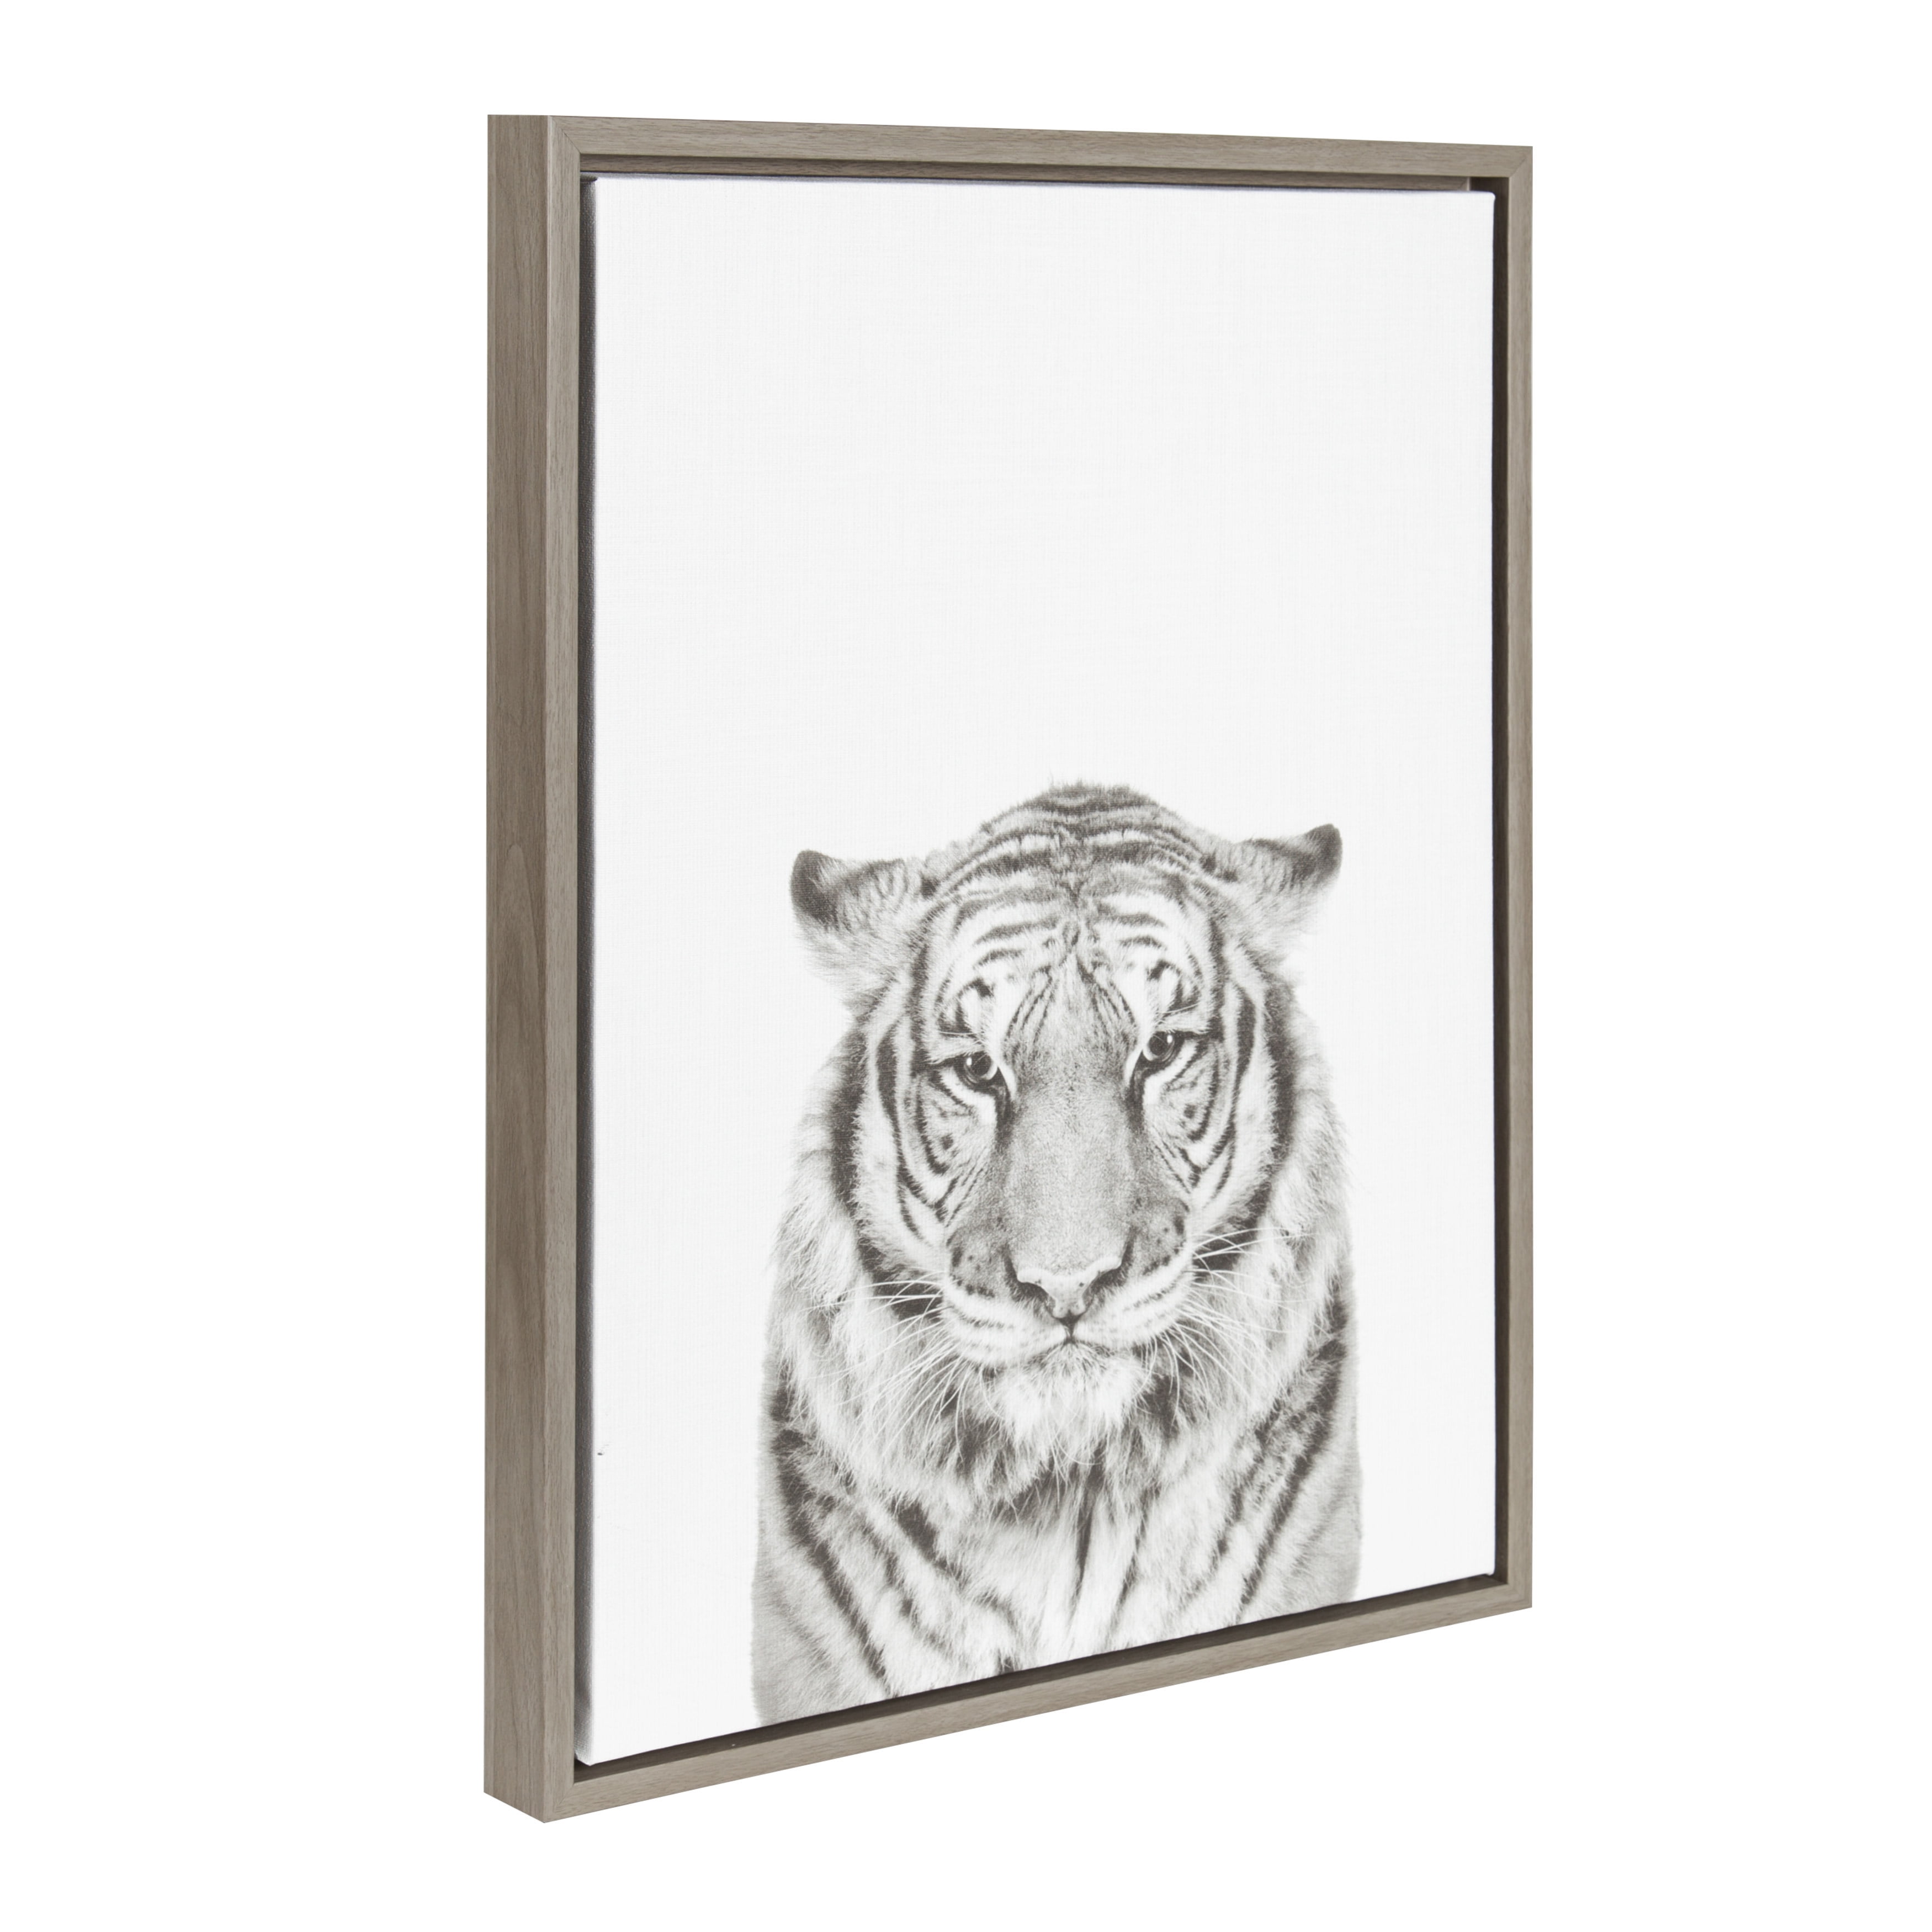 Kate and Laurel Sylvie Tiger Black and White Portrait Framed Canvas Wall Art  by Simon Te Tai, 18x24 Gray